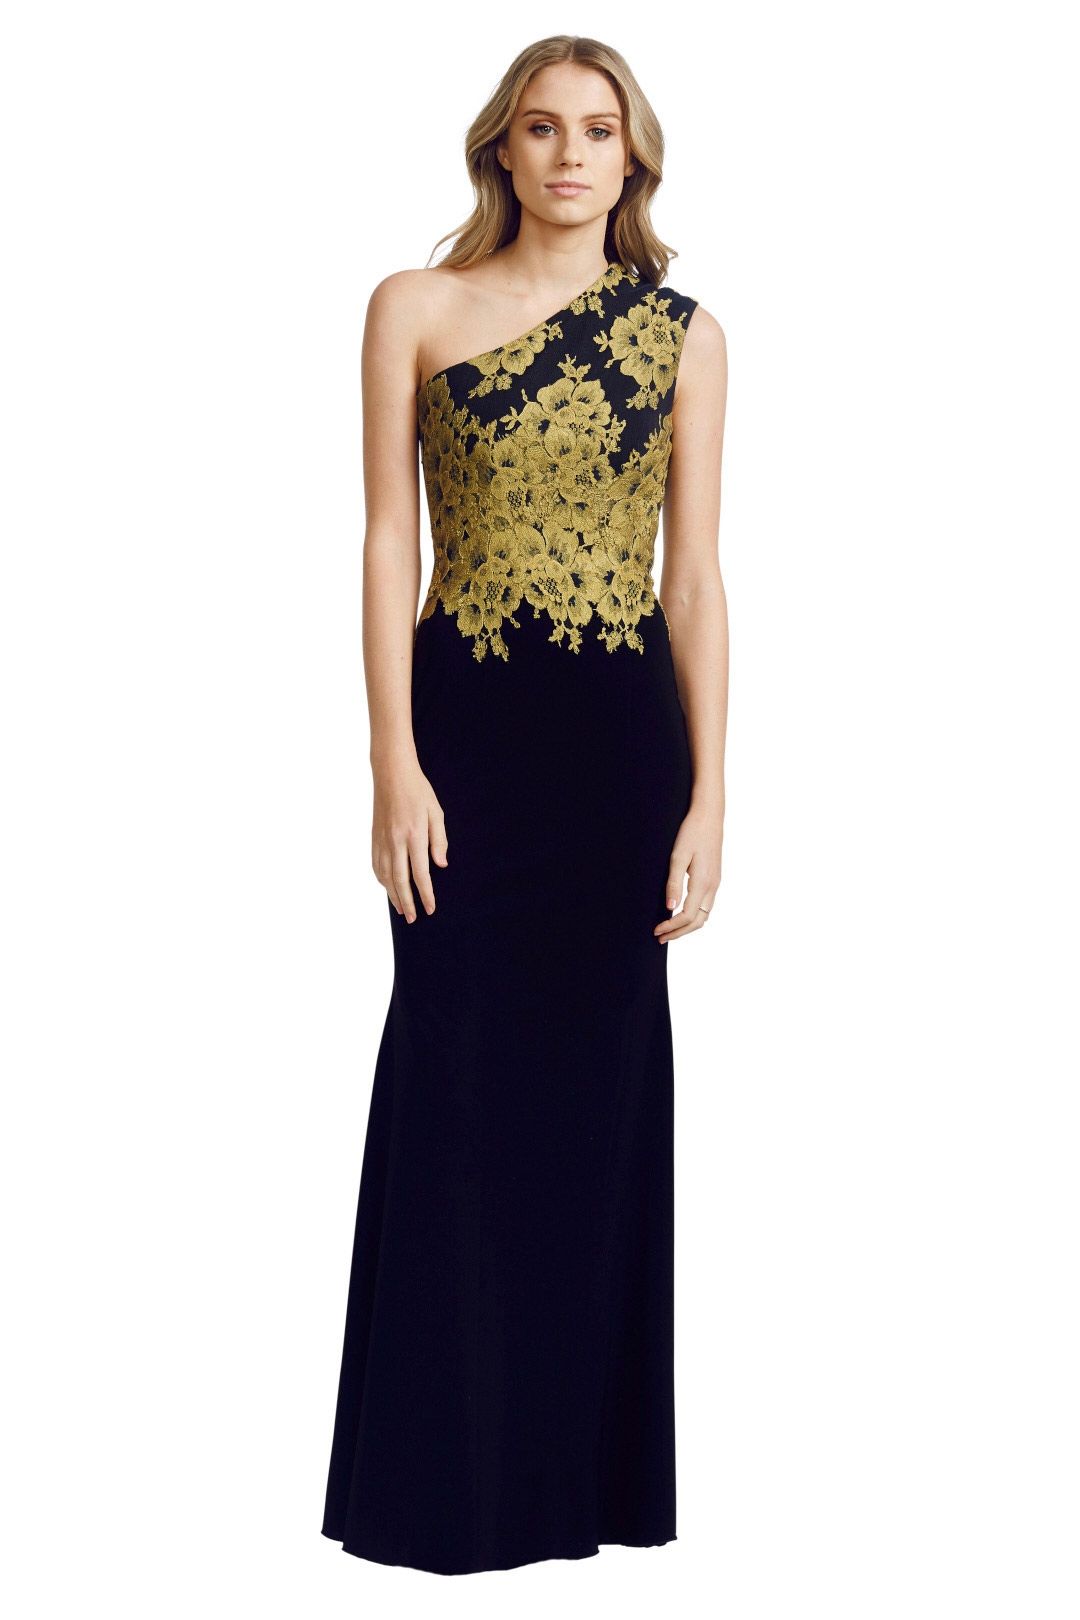 Alex Perry - Darcelle Gown - Black - Front